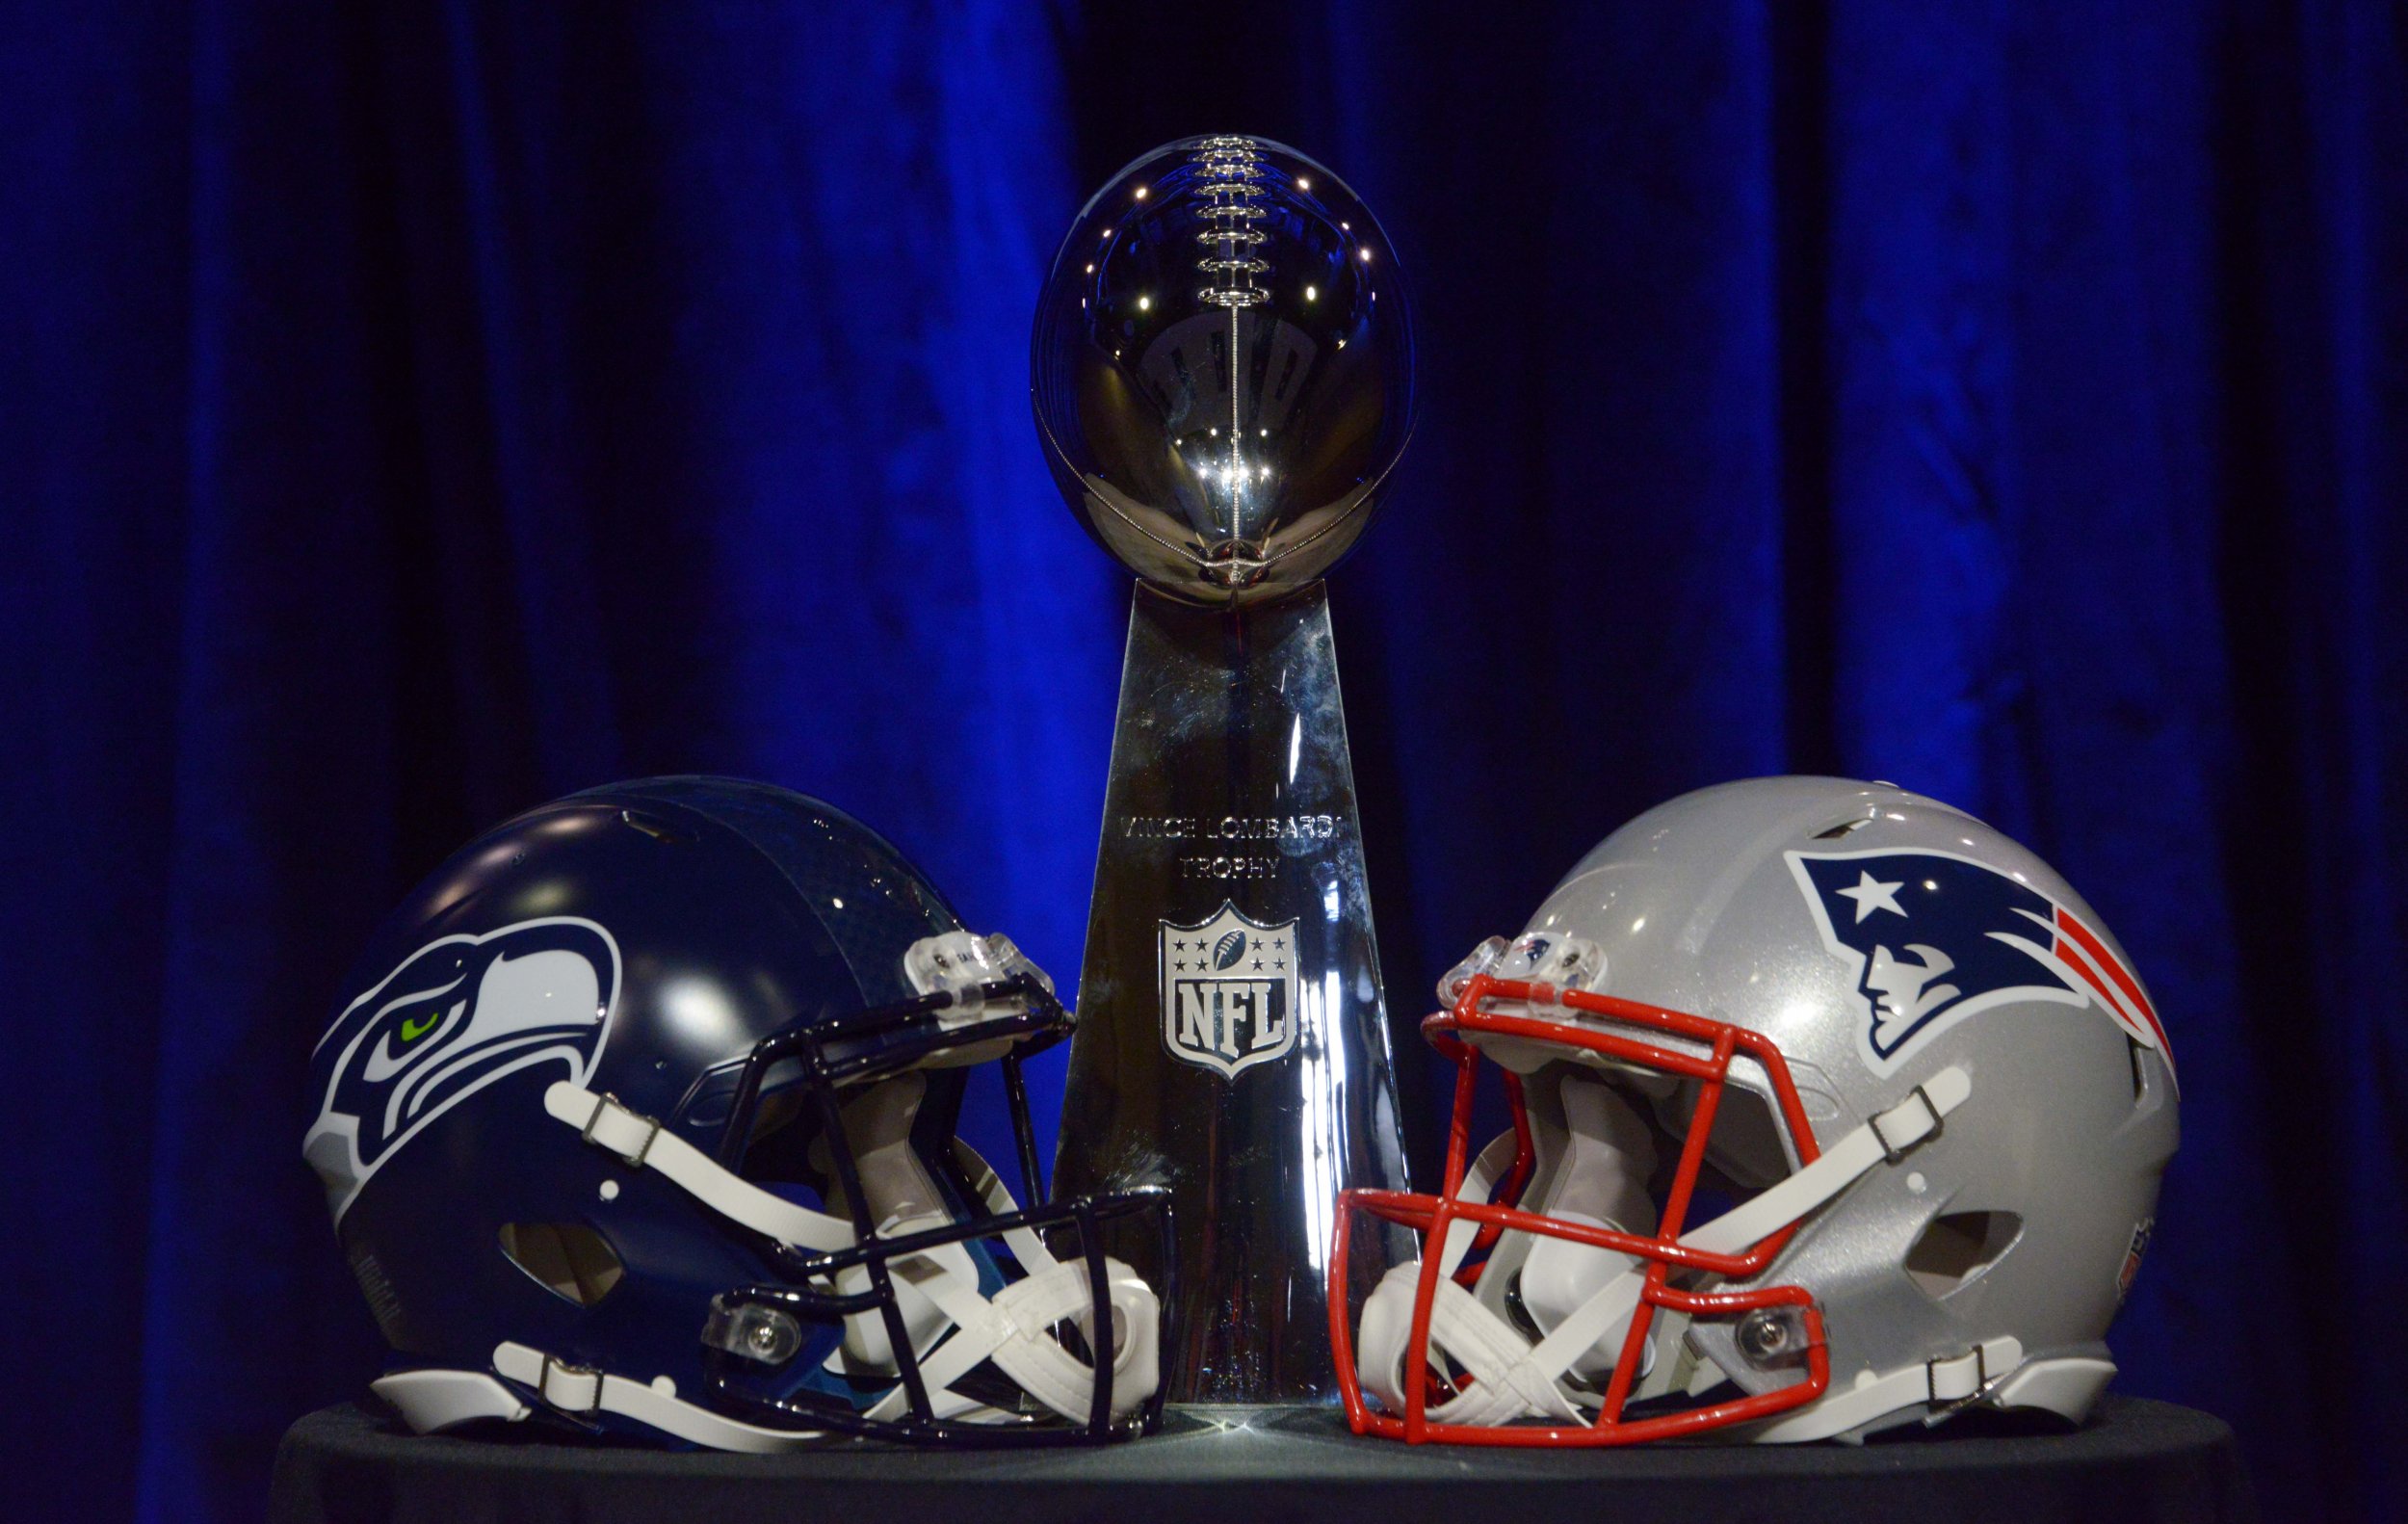 Is This the Year the NFL Bubble Bursts? And Other Crucial Questions About  Super Bowl XLIX